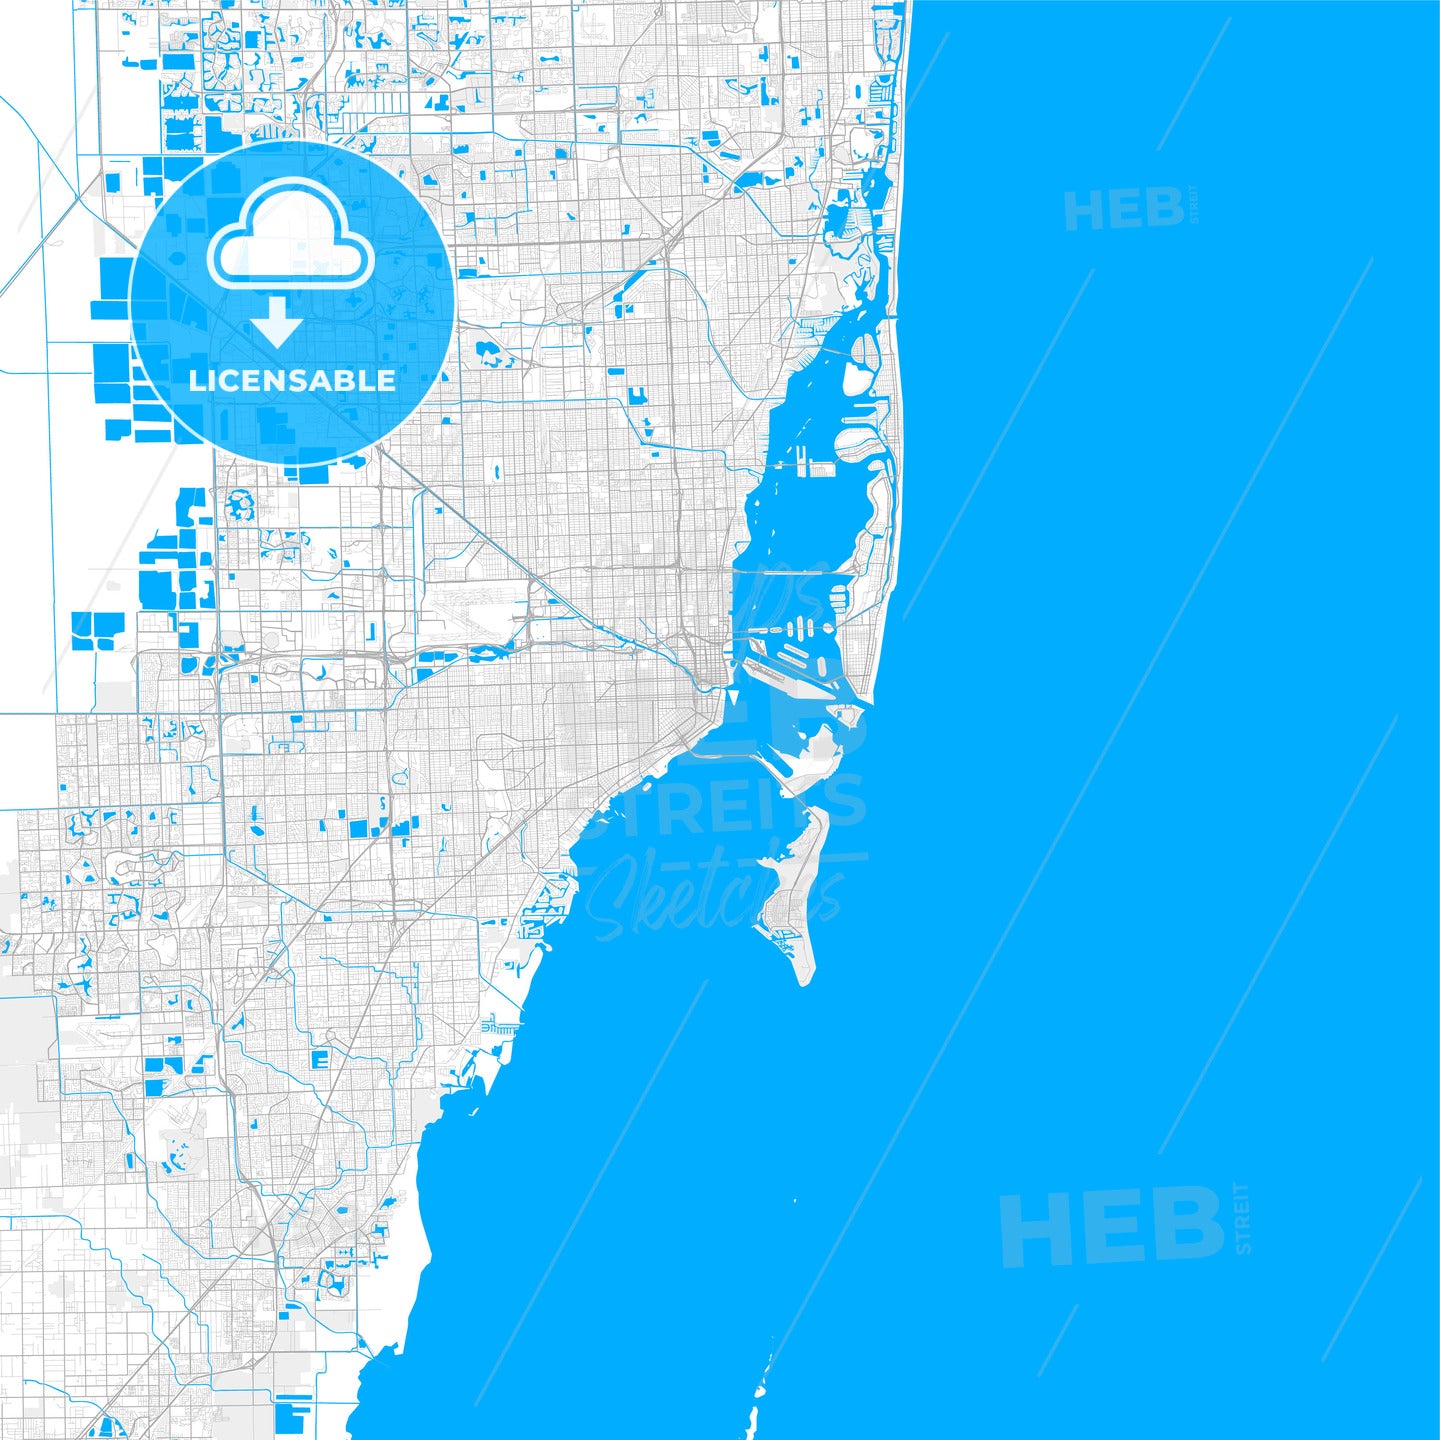 Rich detailed vector map of Miami, Florida, U.S.A.